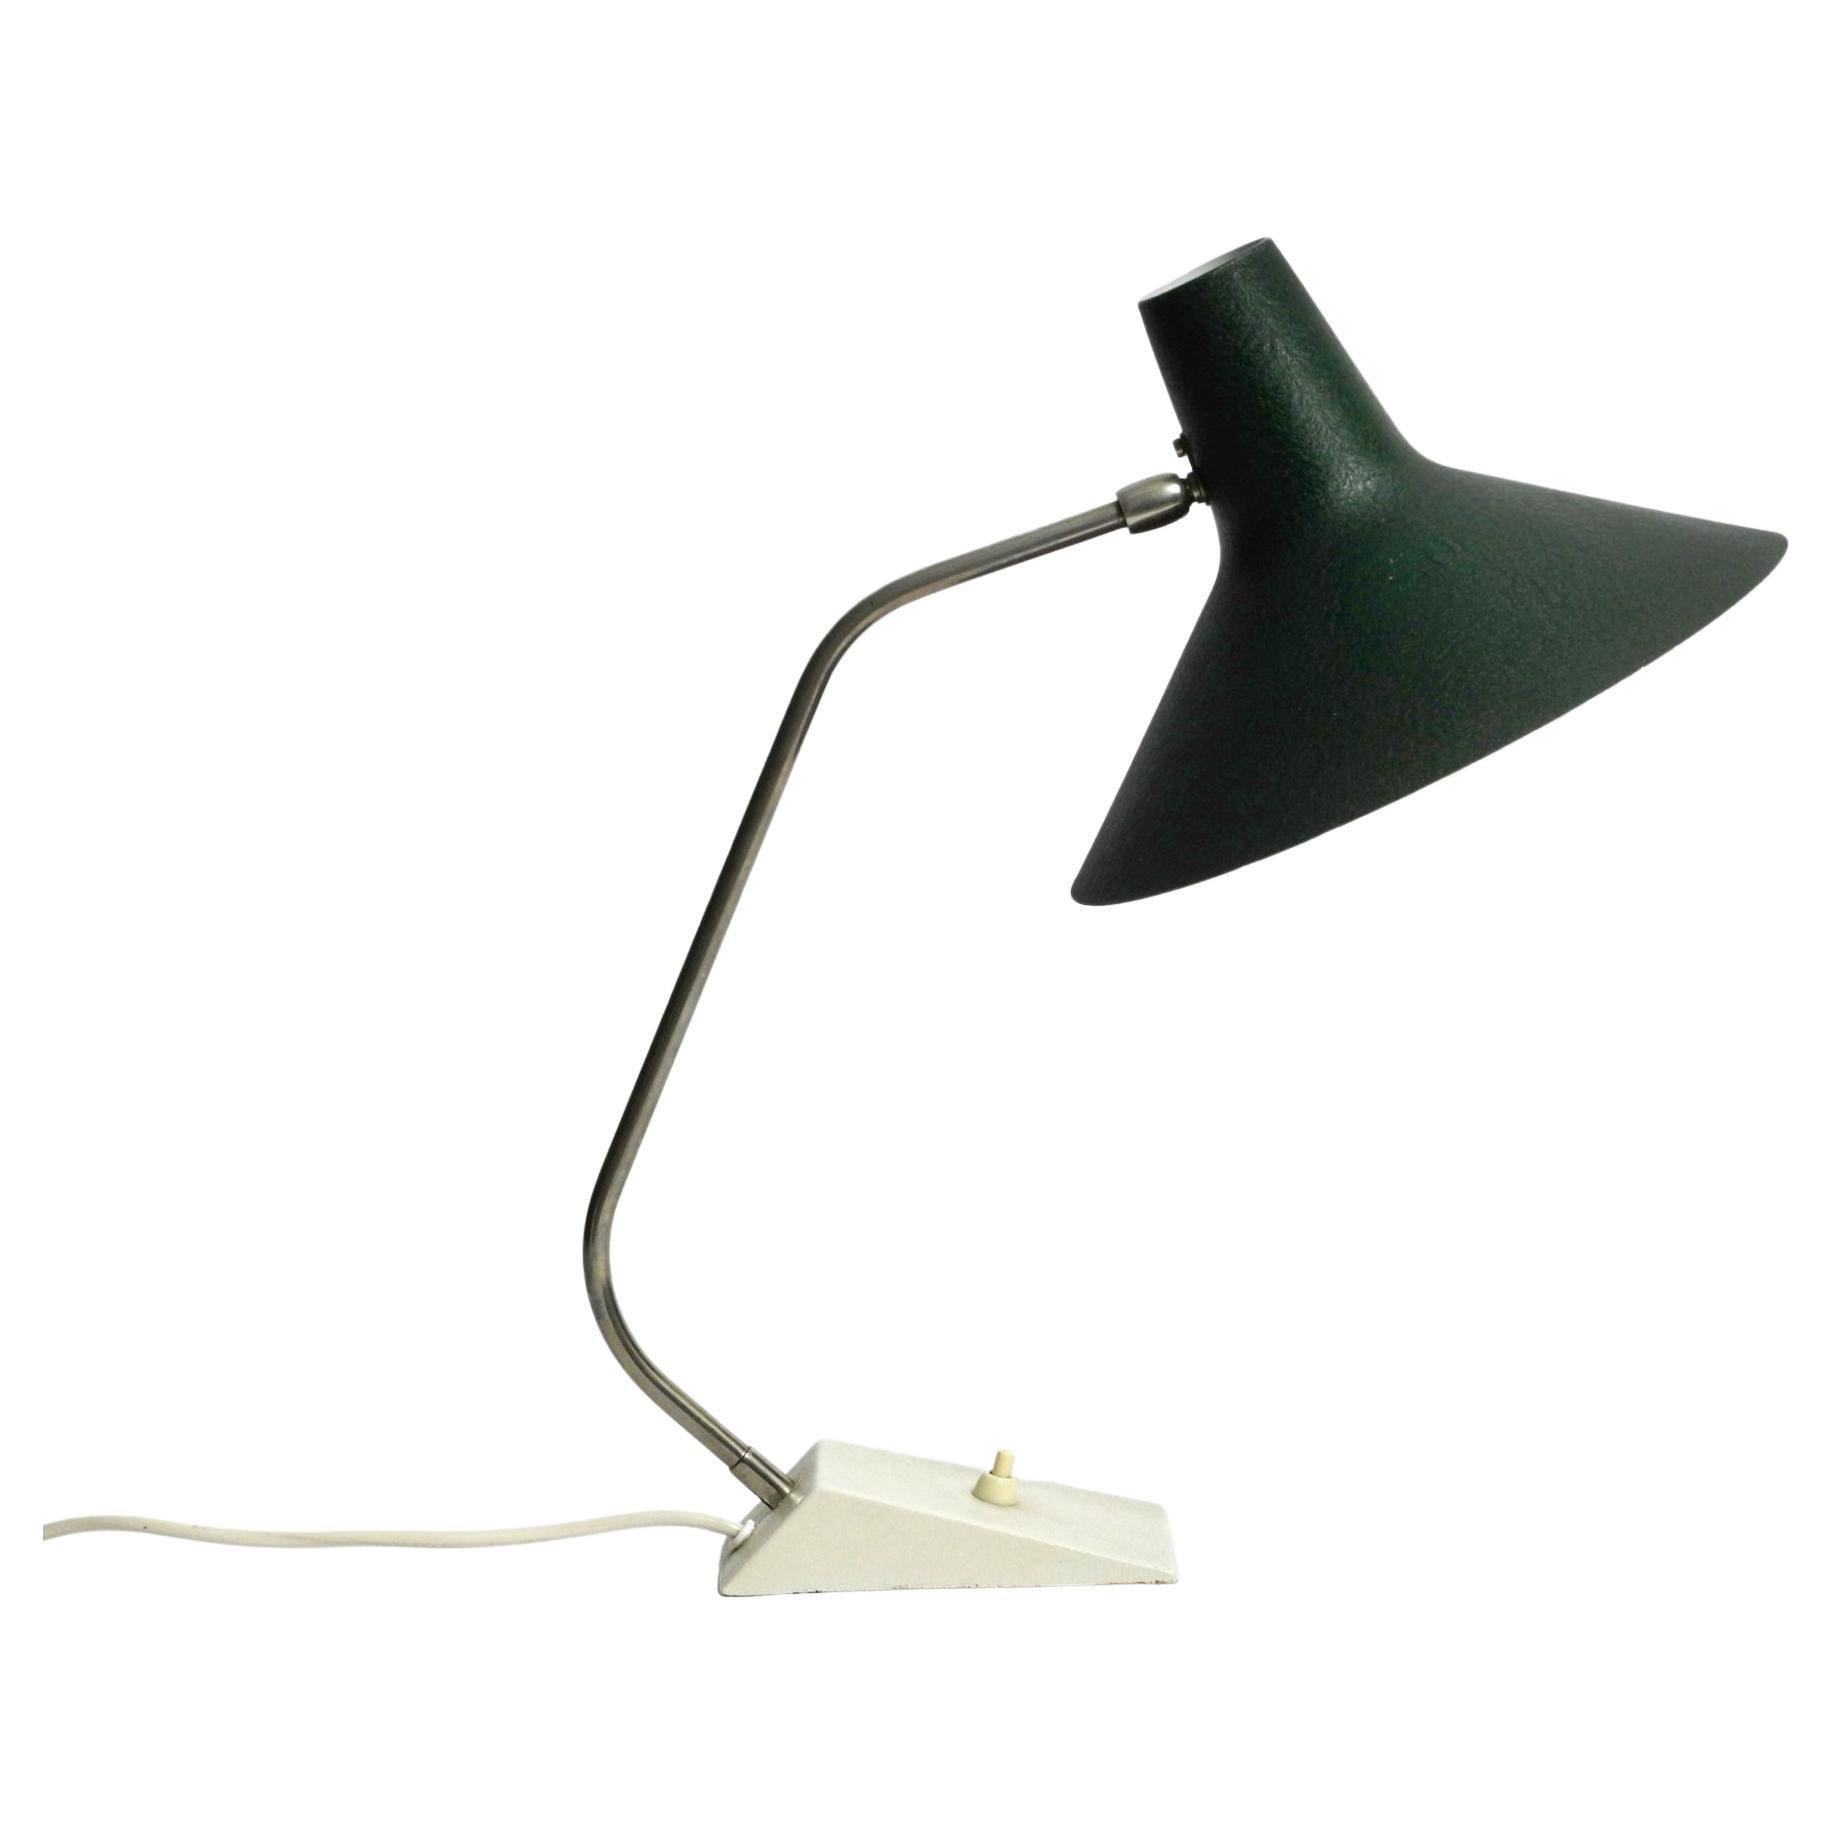 Minimalist Mid-Century Modern Table Lamp with Green Wrinkle Finish from SIS  For Sale at 1stDibs